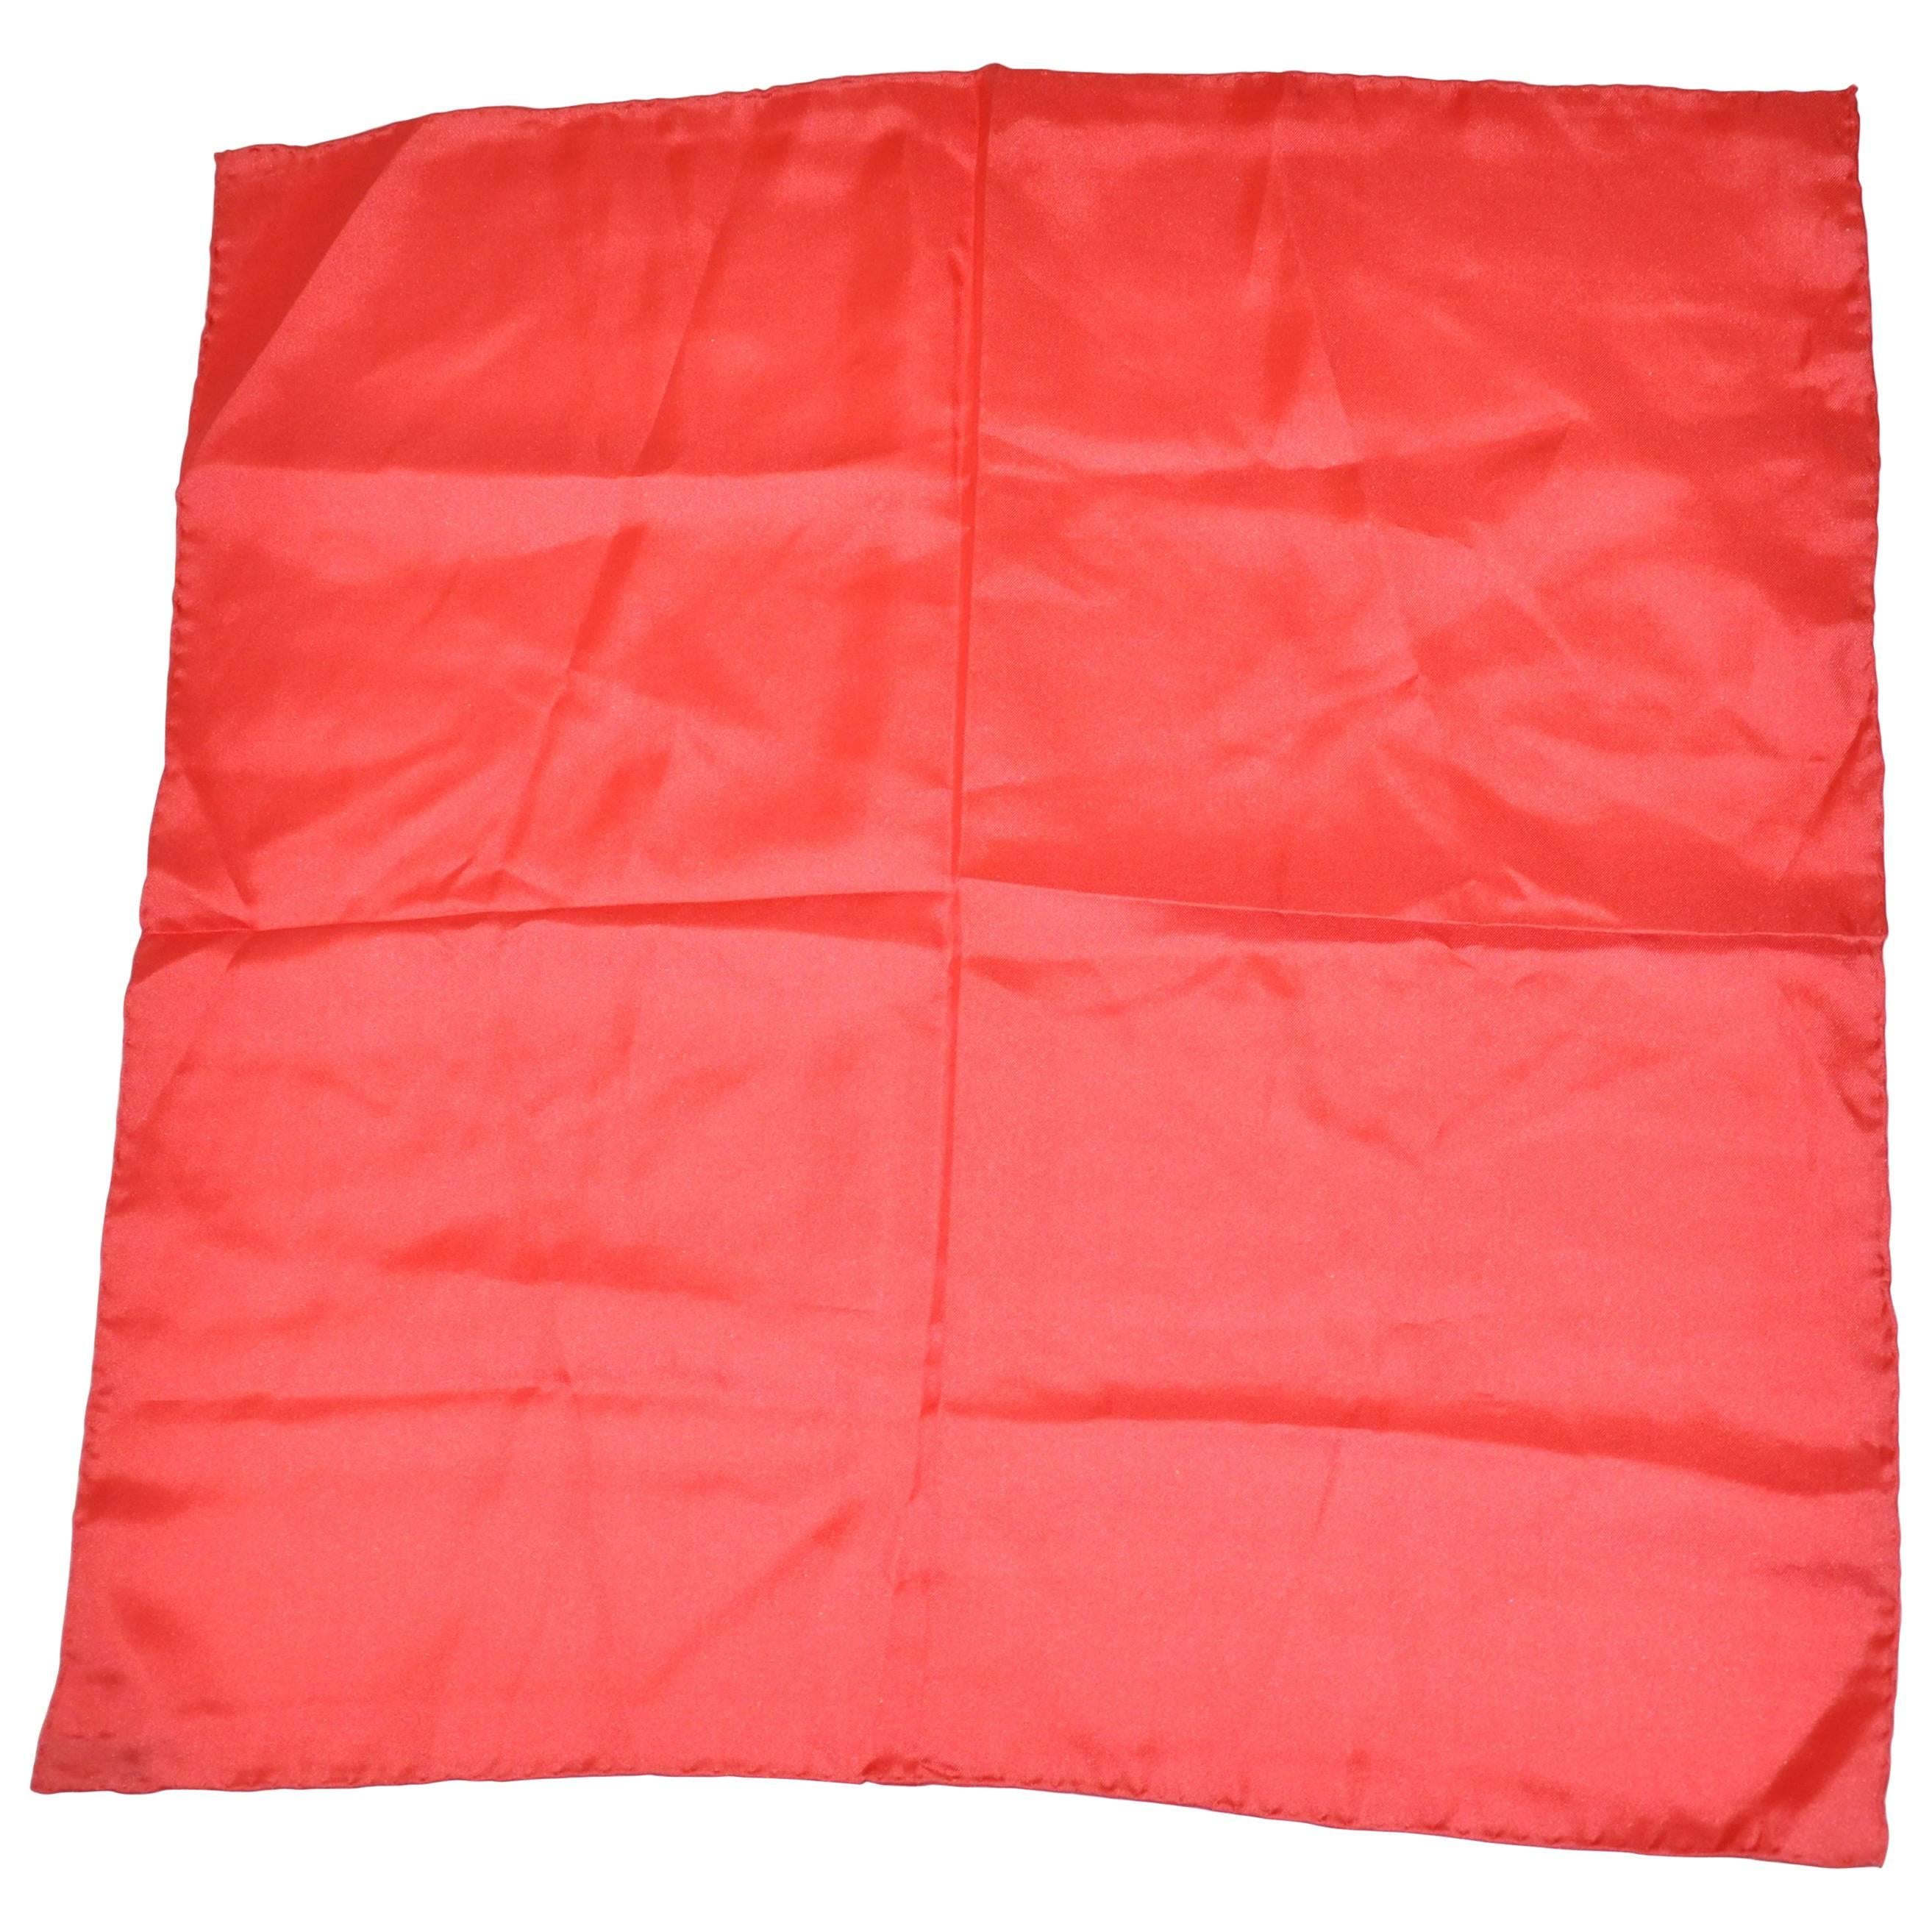 Italy Red Silk Handkerchief with Hand-Rolled Edges